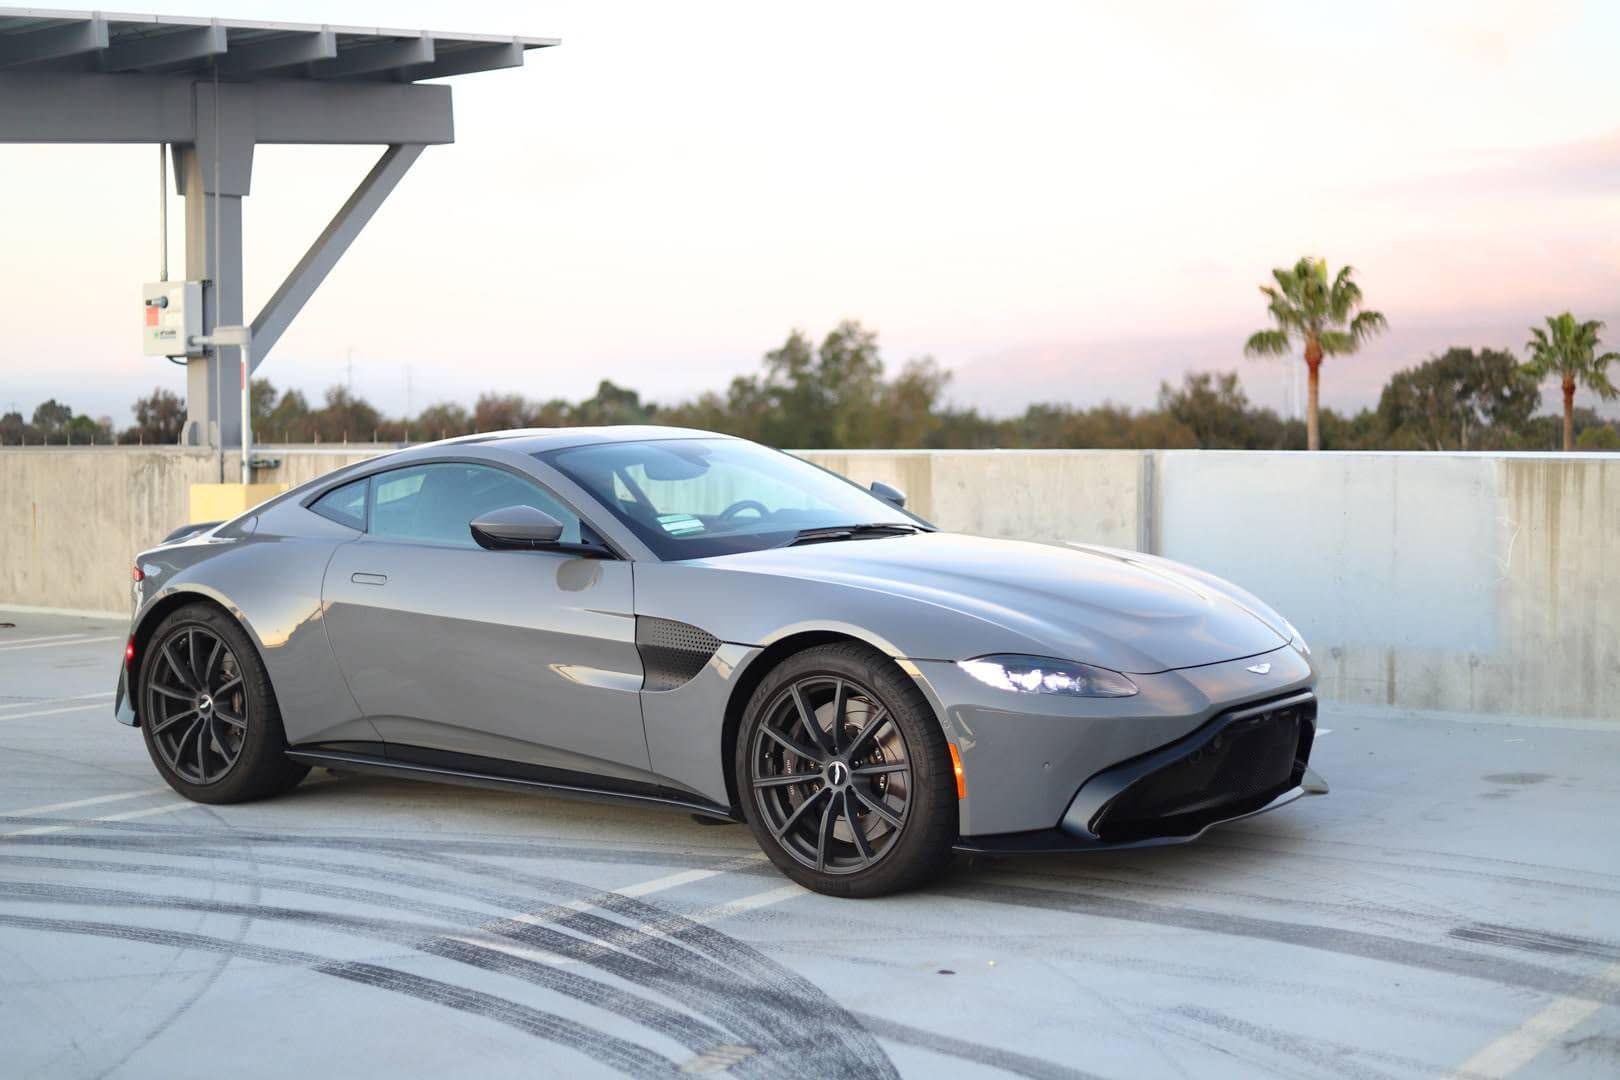 Official Aston Martin Picture Thread! - Page 124 - 6SpeedOnline ...